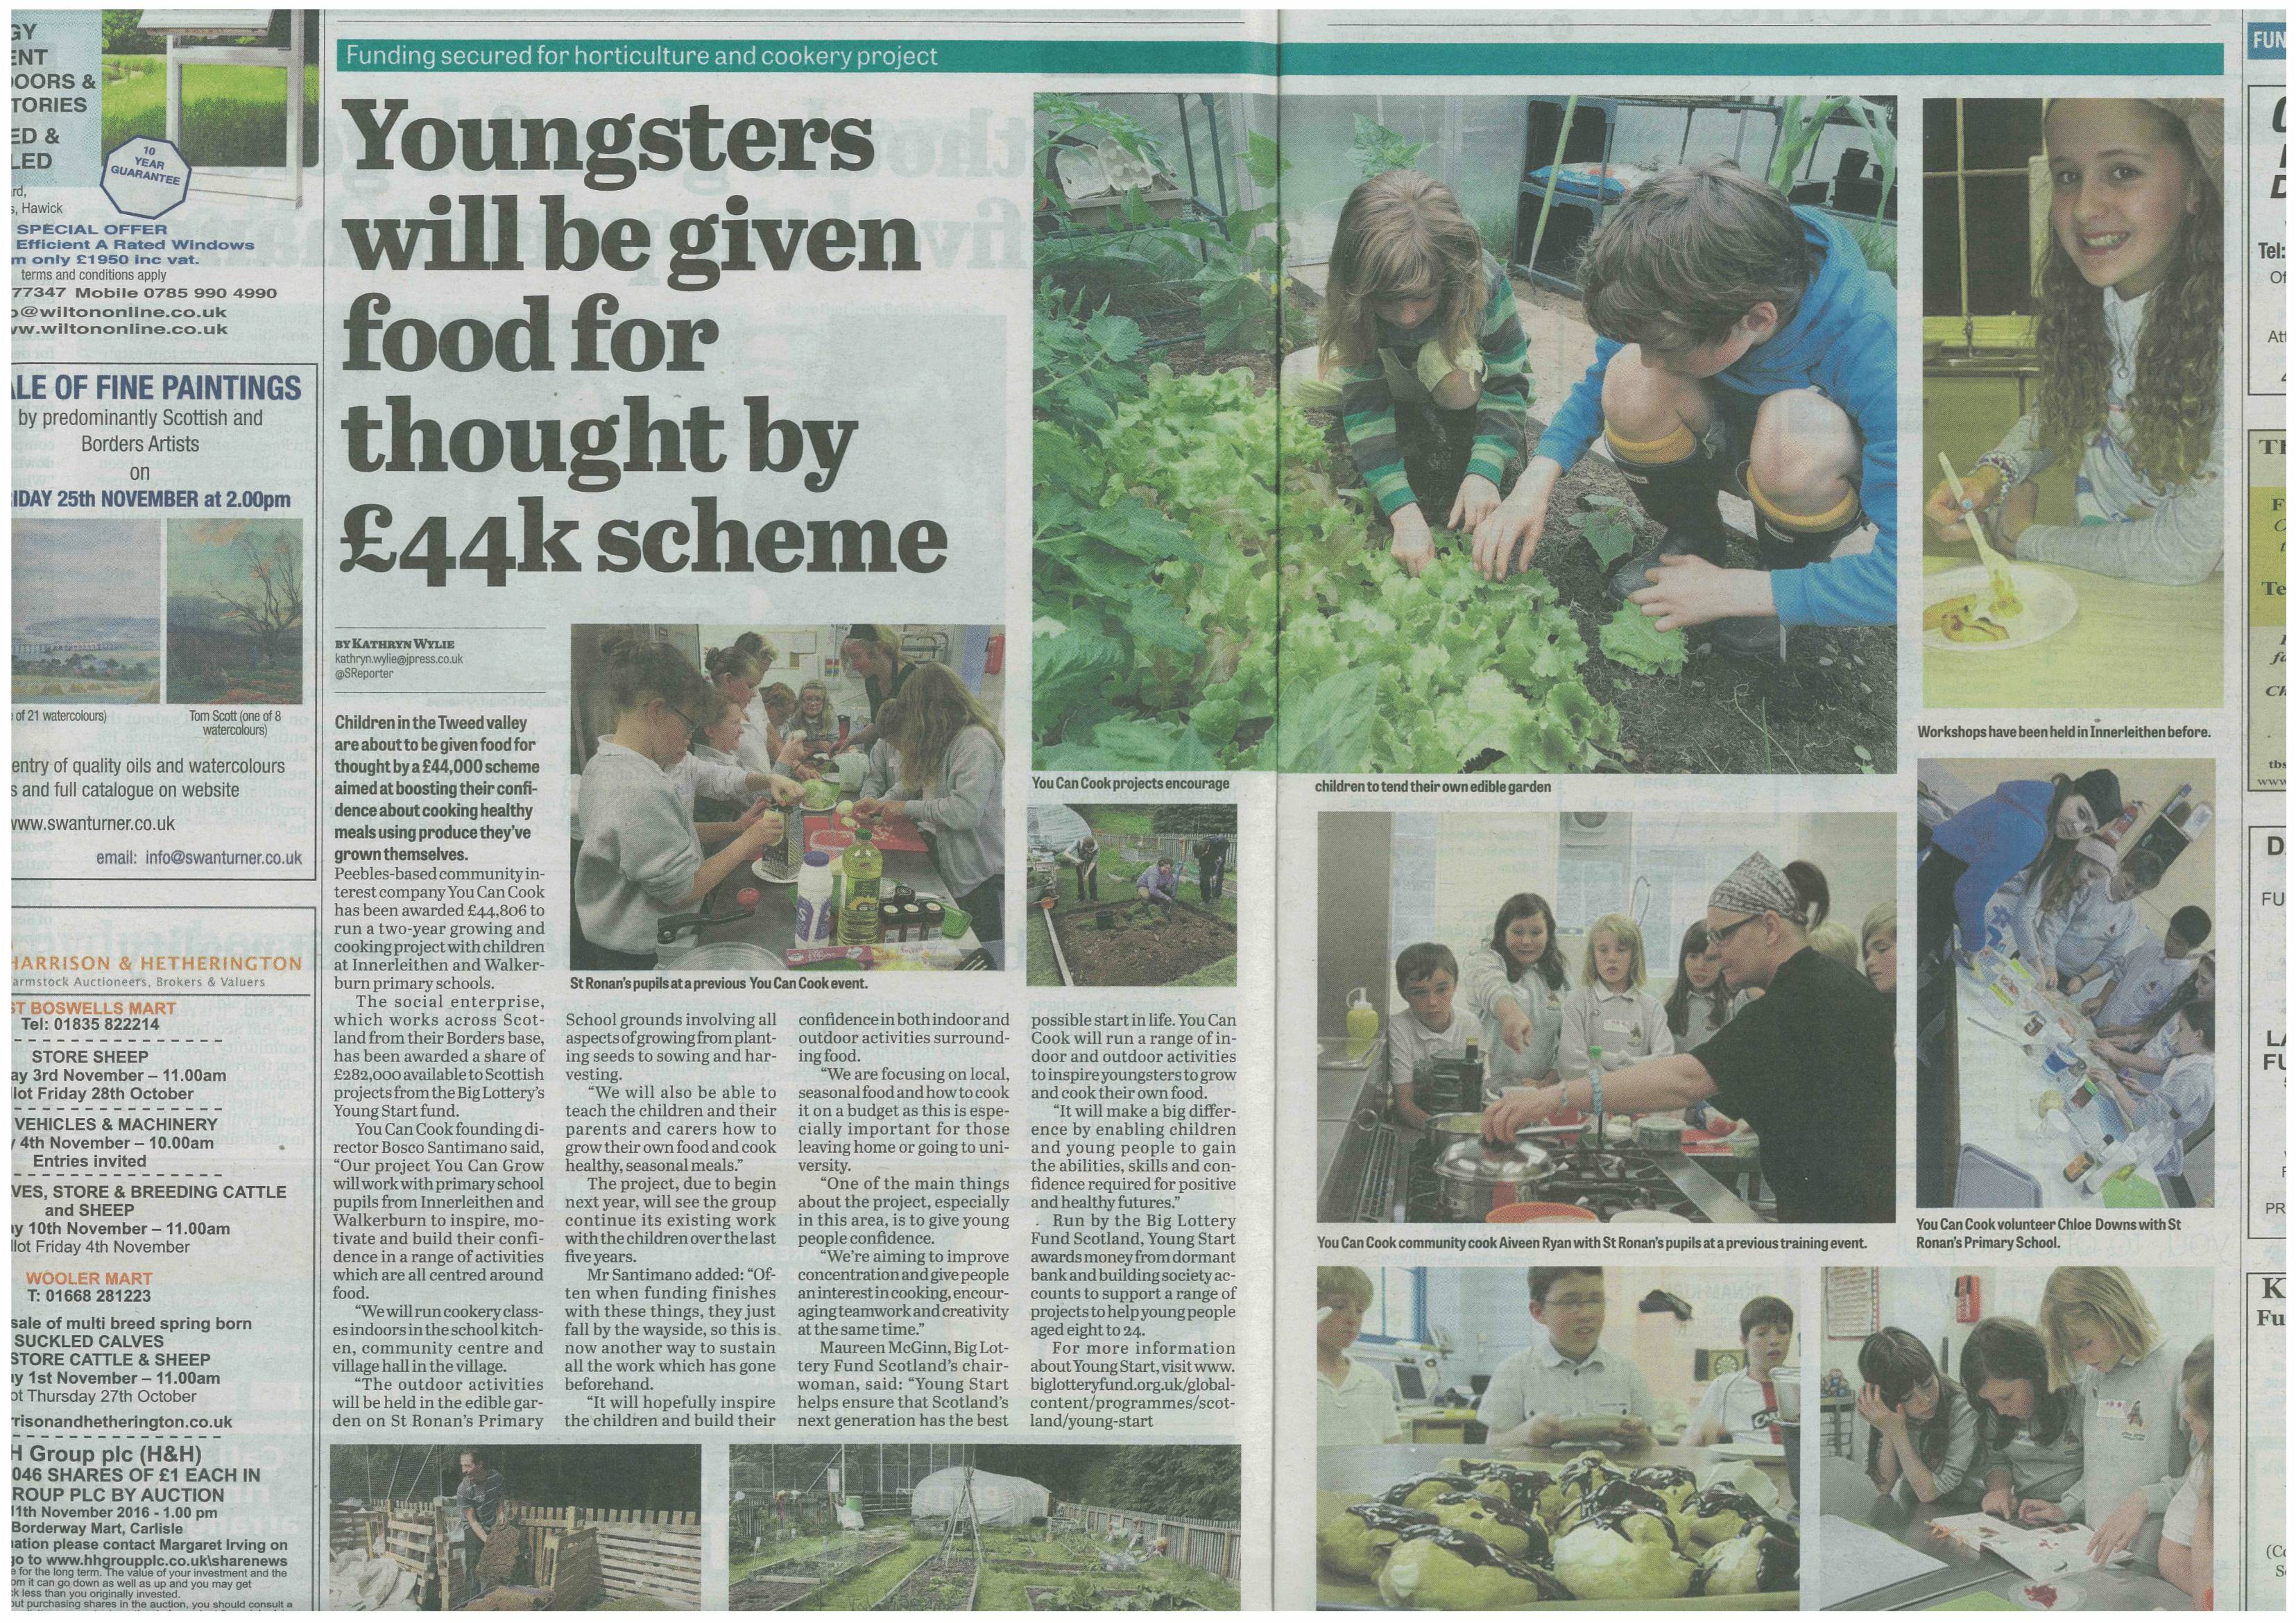 Press Clipping: Youngsters will be given food for thought by £4k scheme